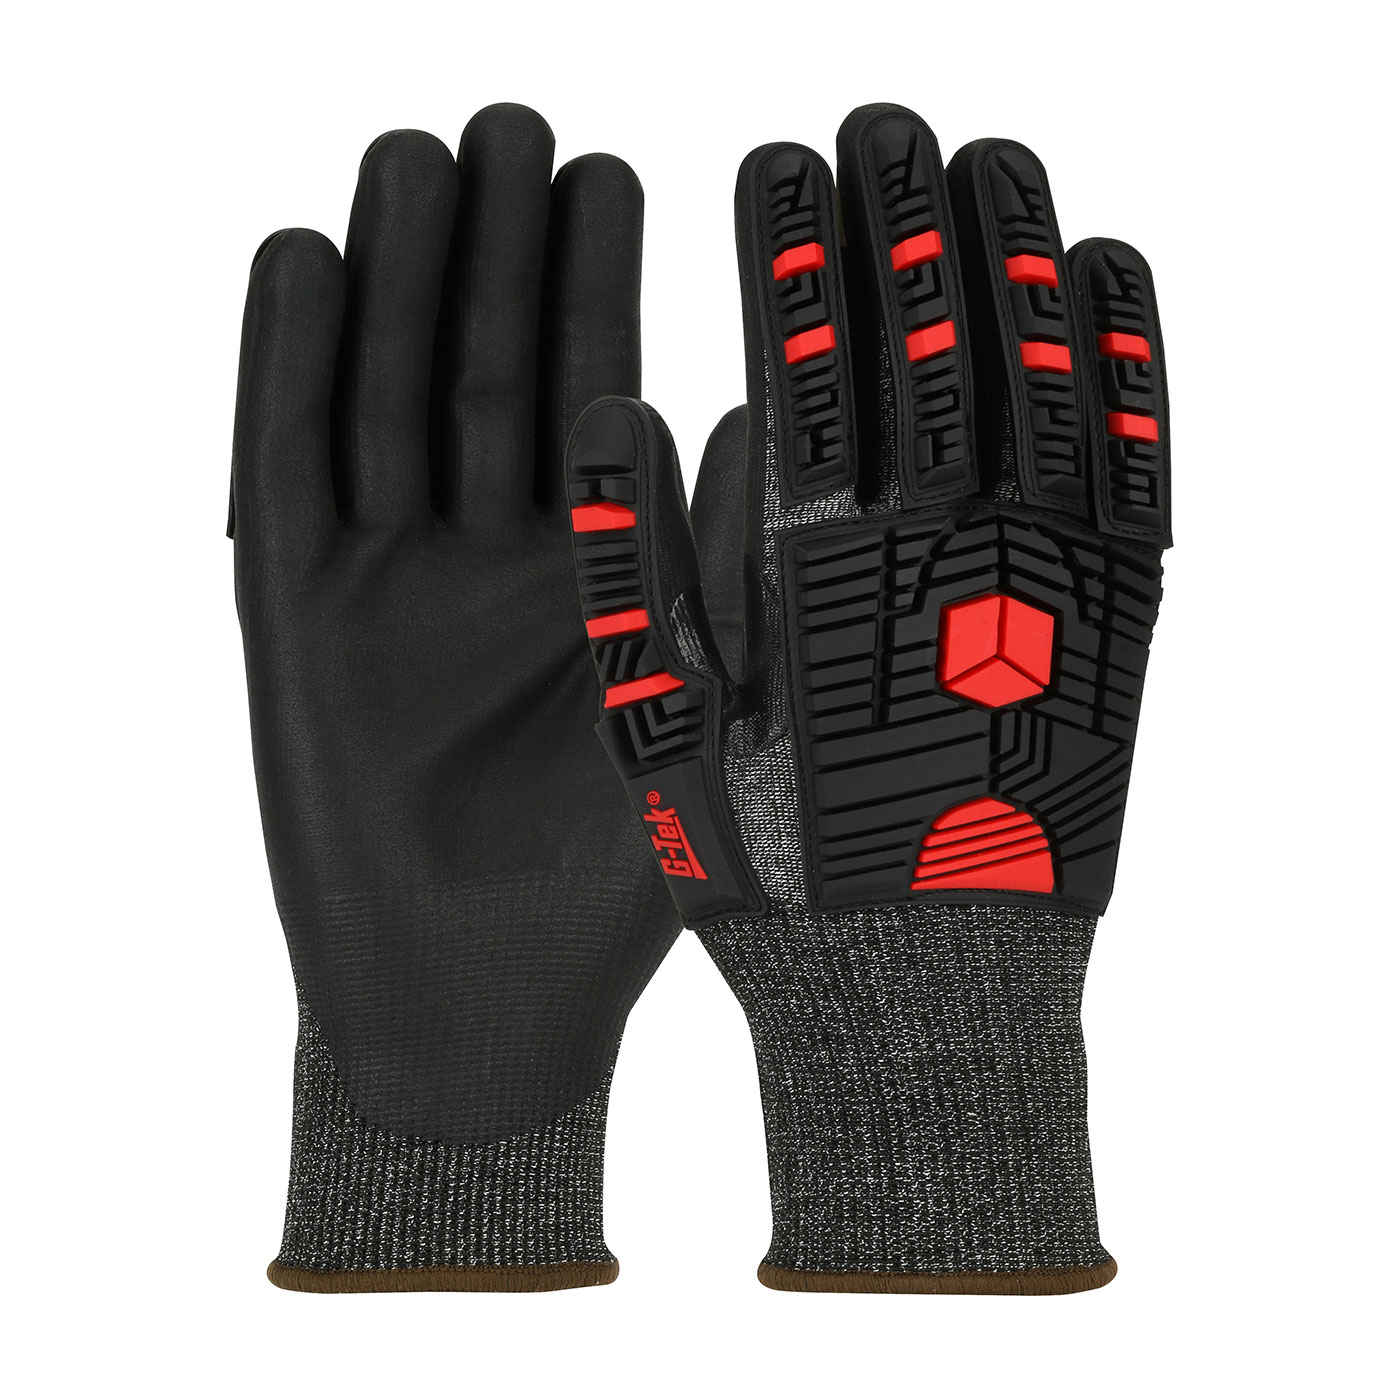 16-MP785 PIP® Seamless Knit G-Tek®  PolyKor® X7™ Blended Glove with Impact Protection and NeoFoam® Coated Palm & Fingers